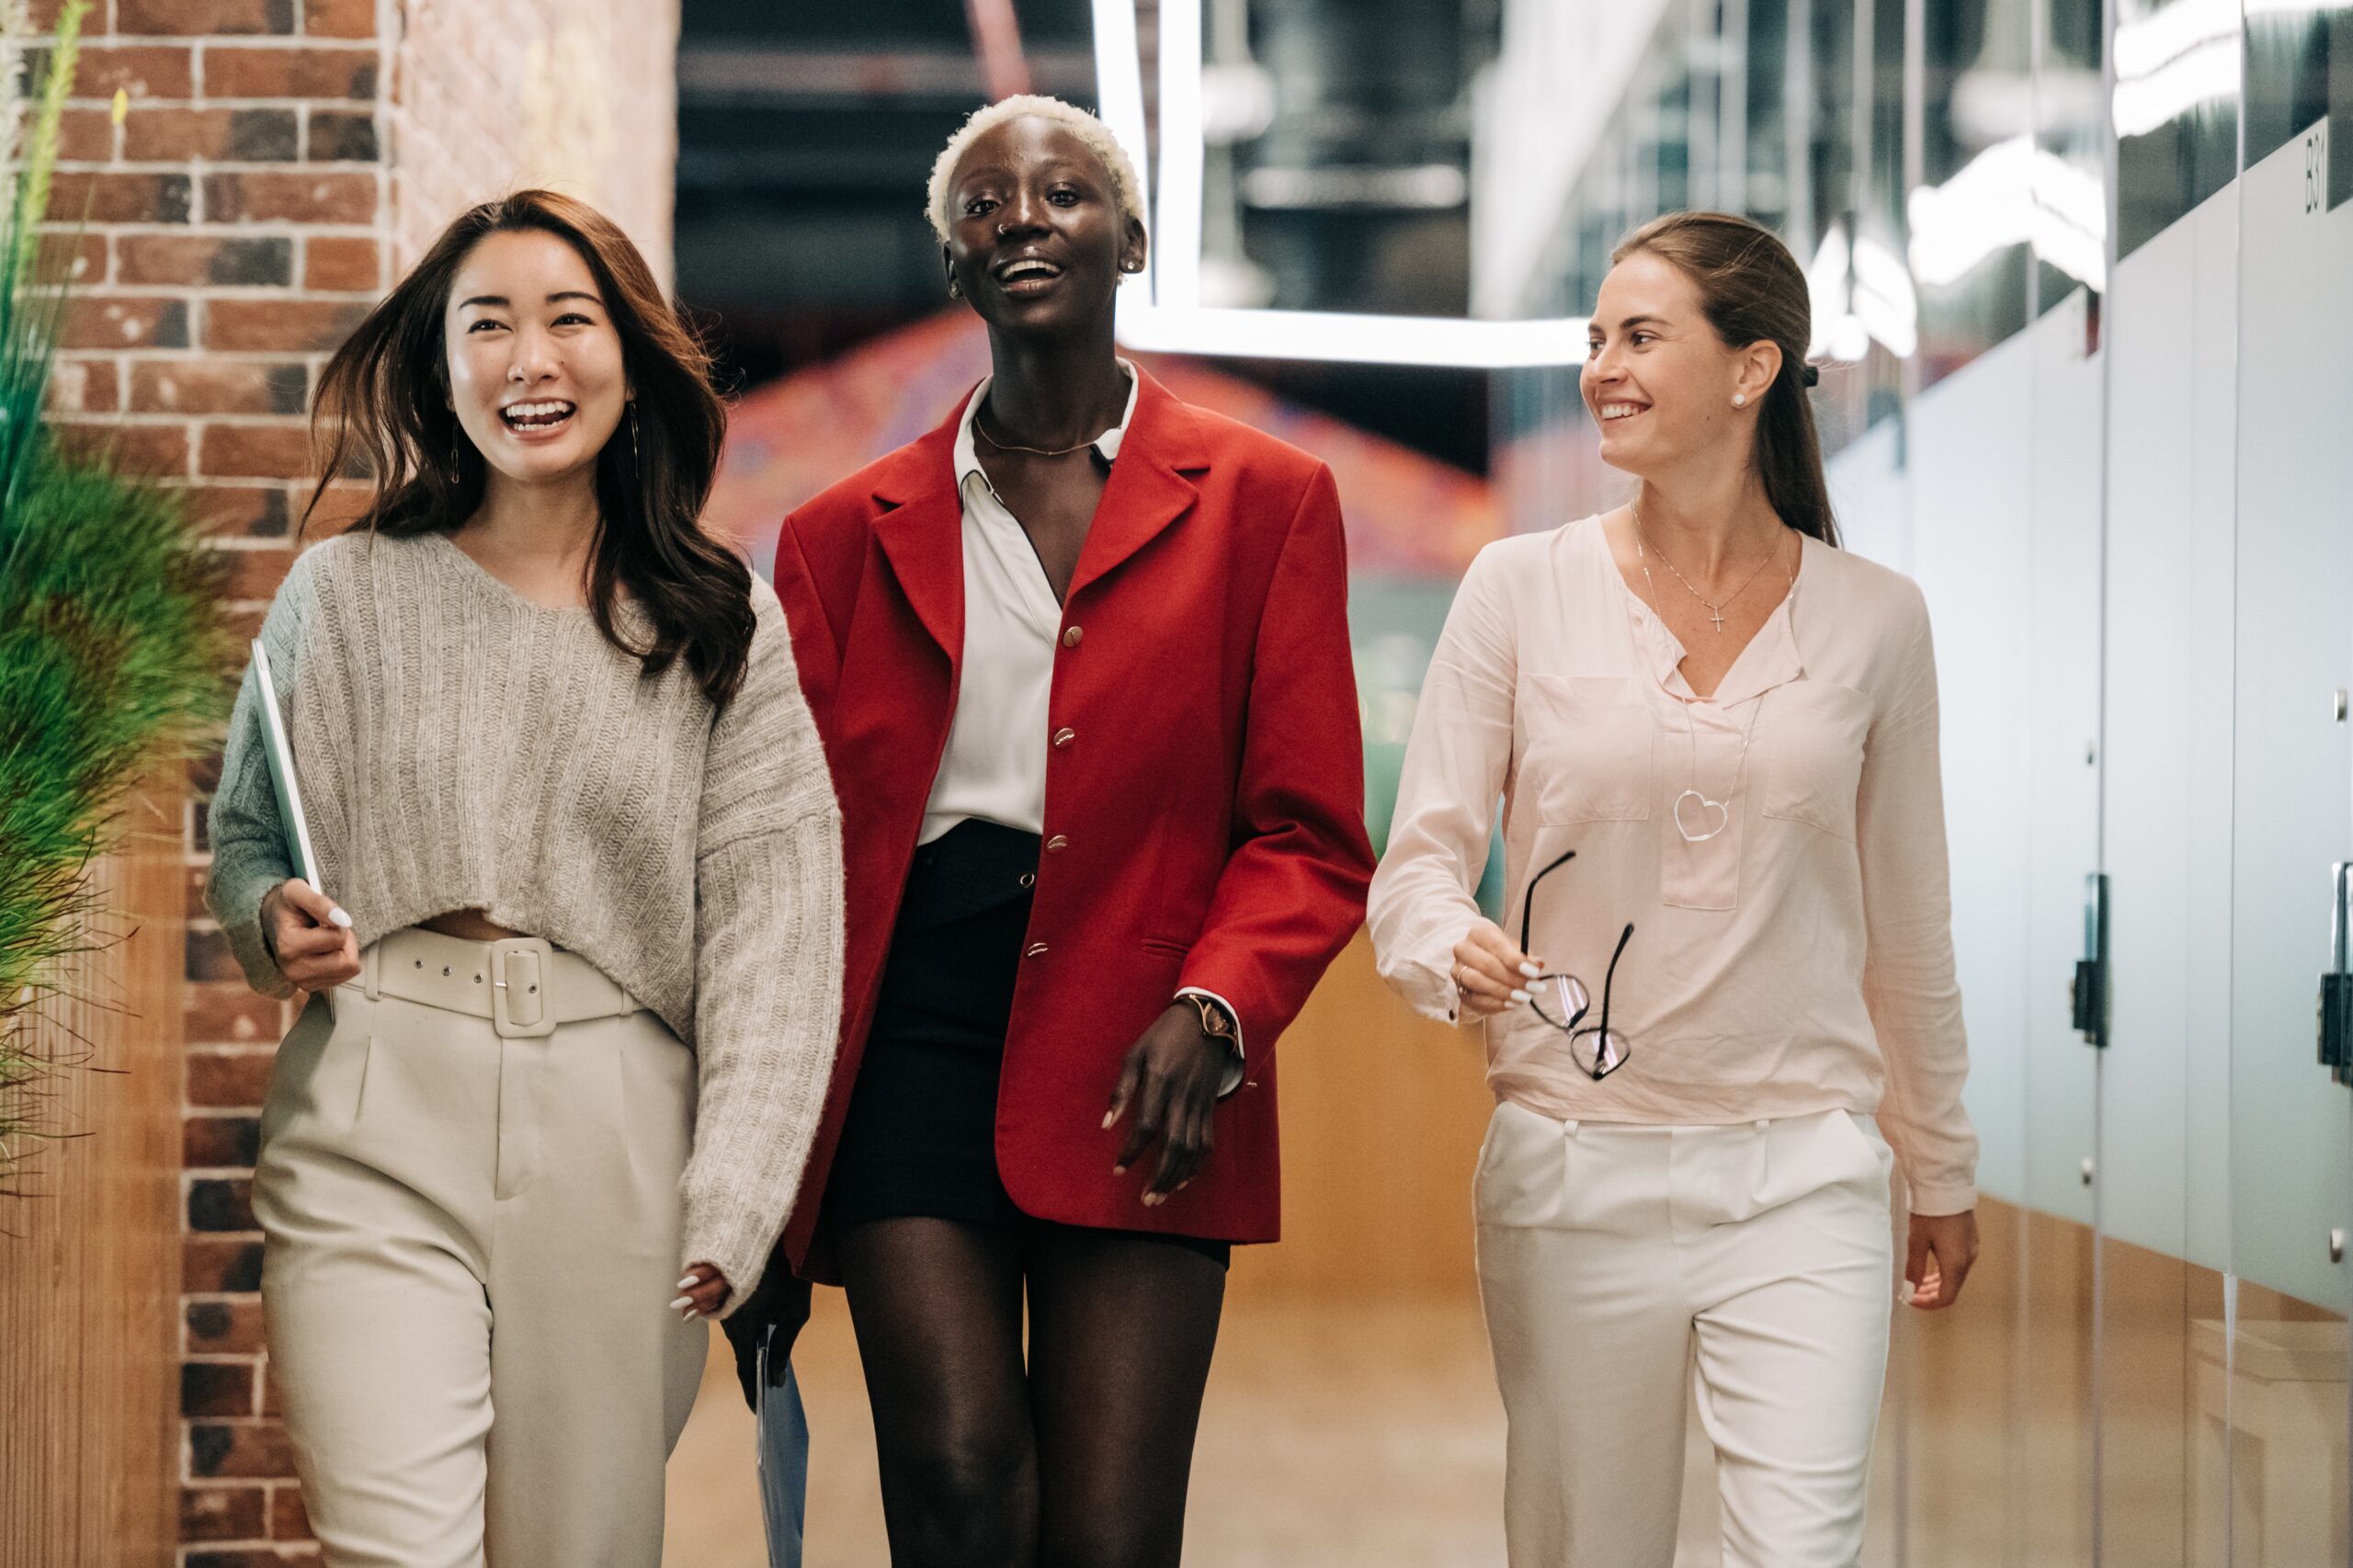 Diversity and inclusion in the workplace aren’t just a trend – they’re a must.